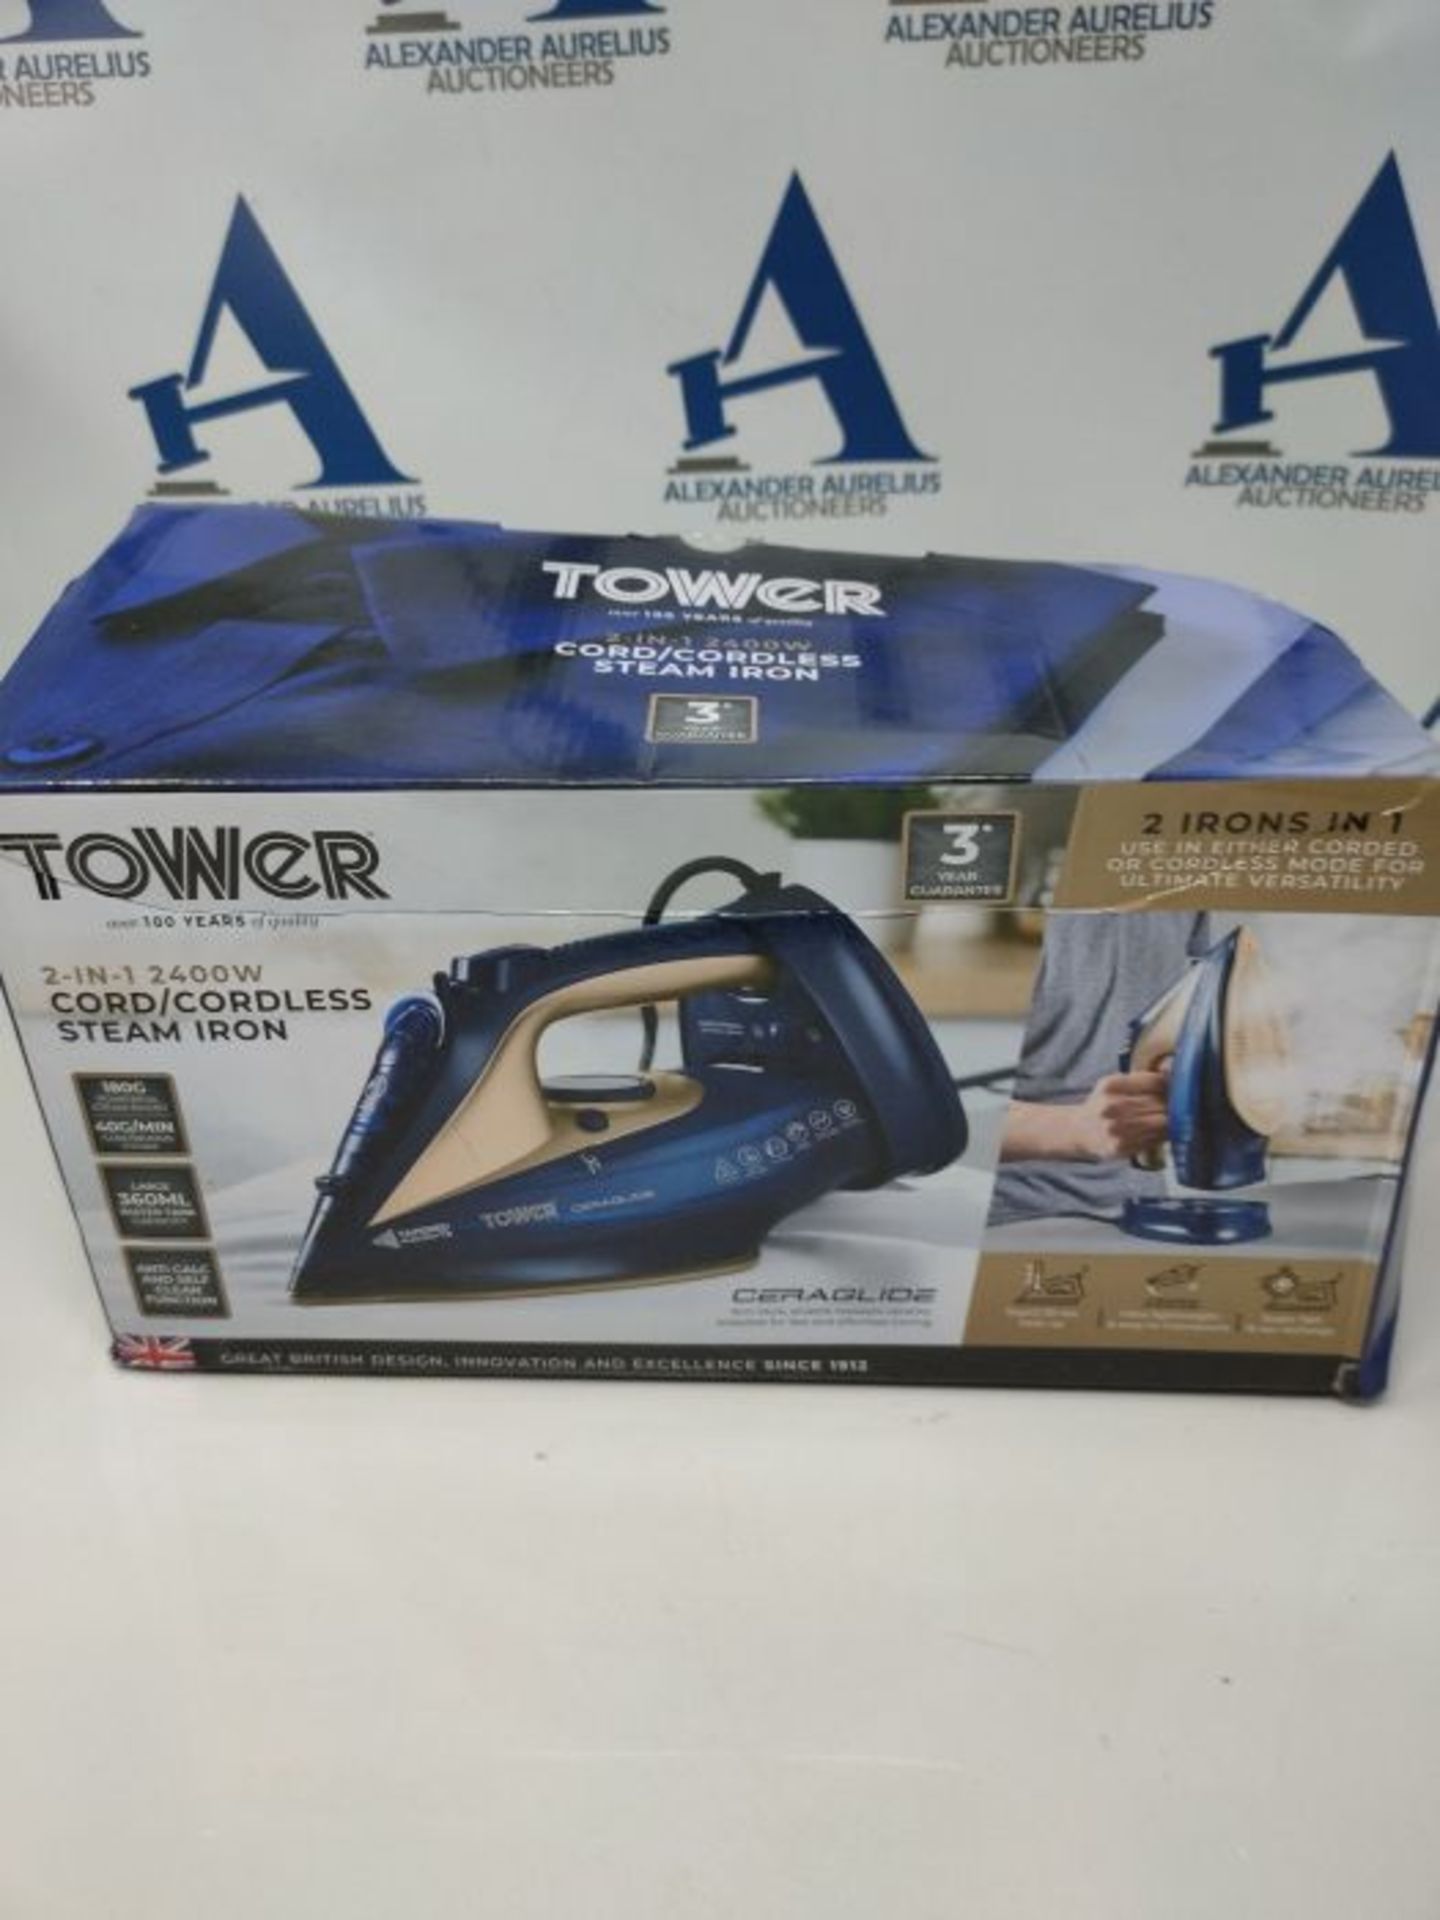 Tower T22008BLG CeraGlide Cordless Steam Iron with Ceramic Soleplate and Variable Stea - Image 2 of 4